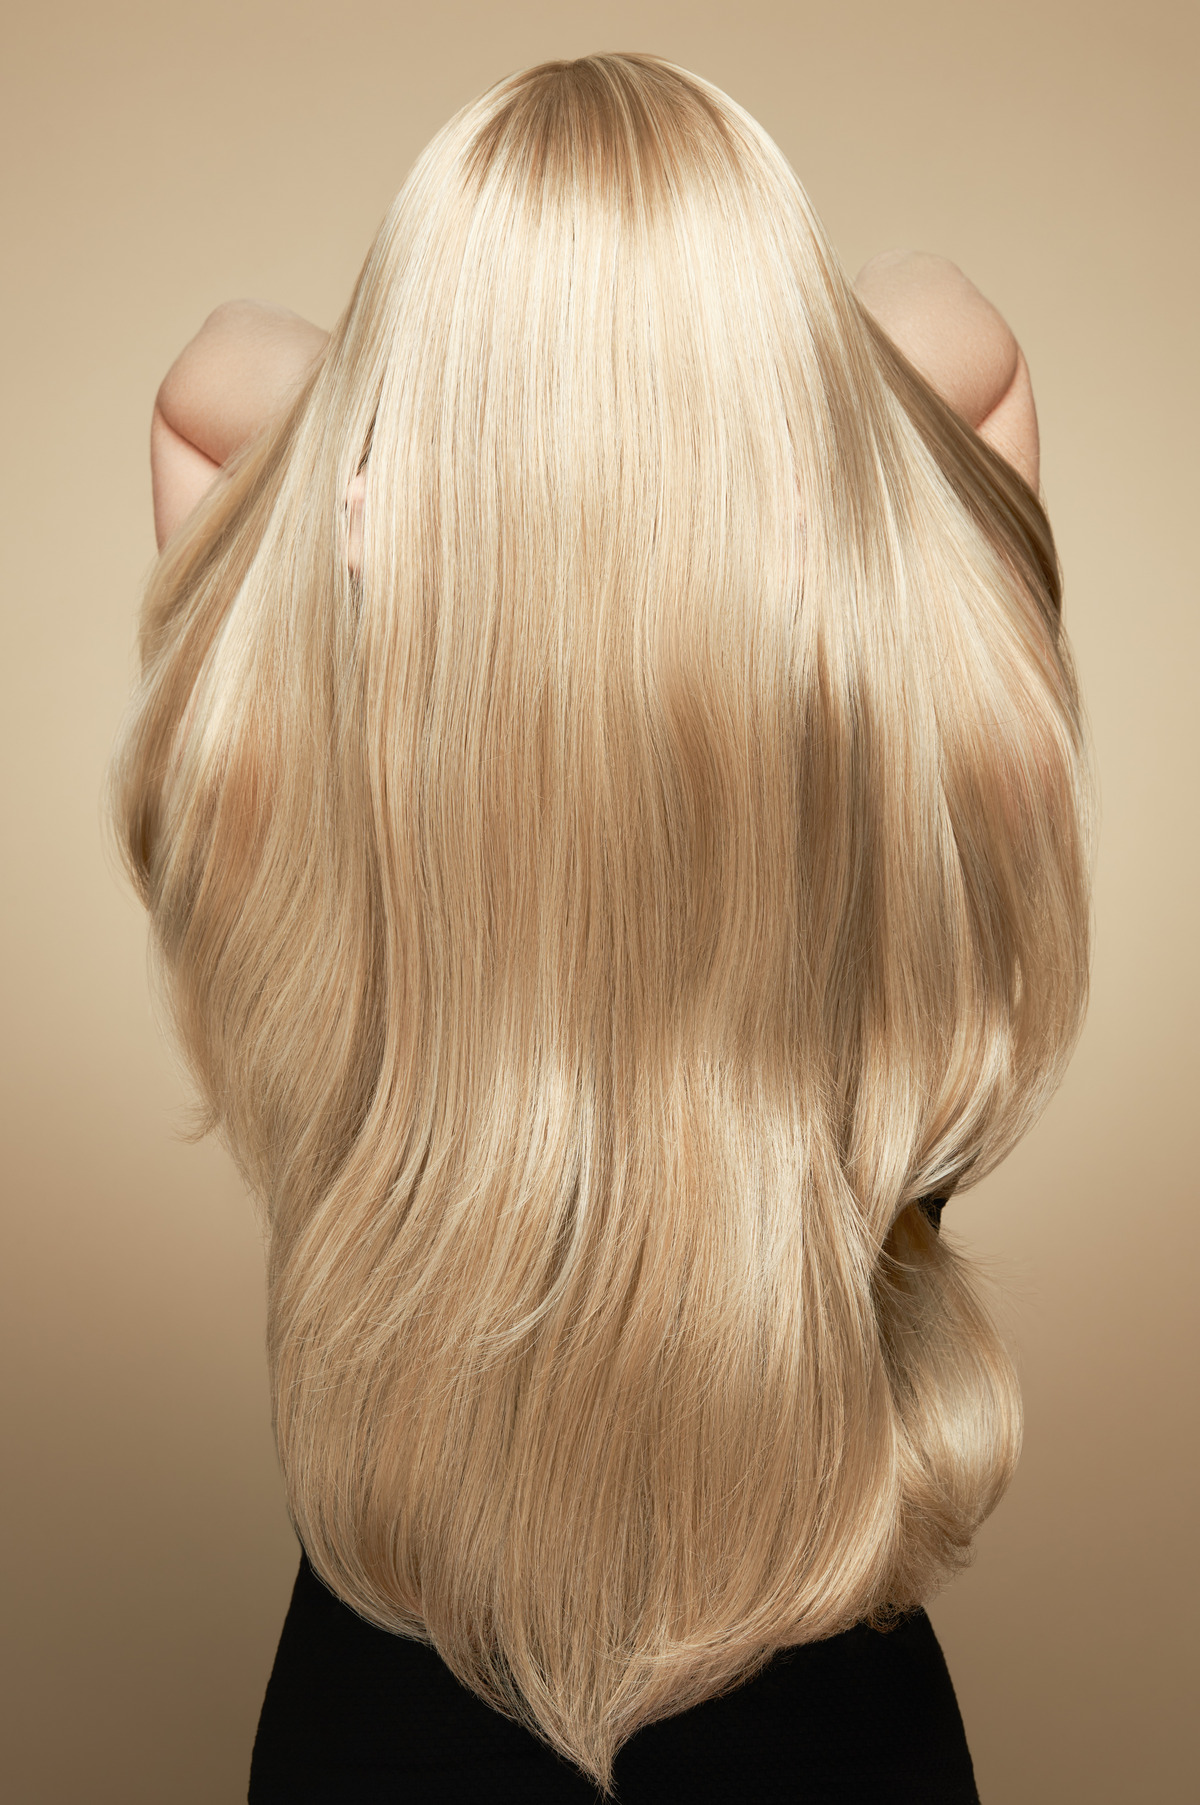 Woman with long beautiful blond hair isolated on beige background